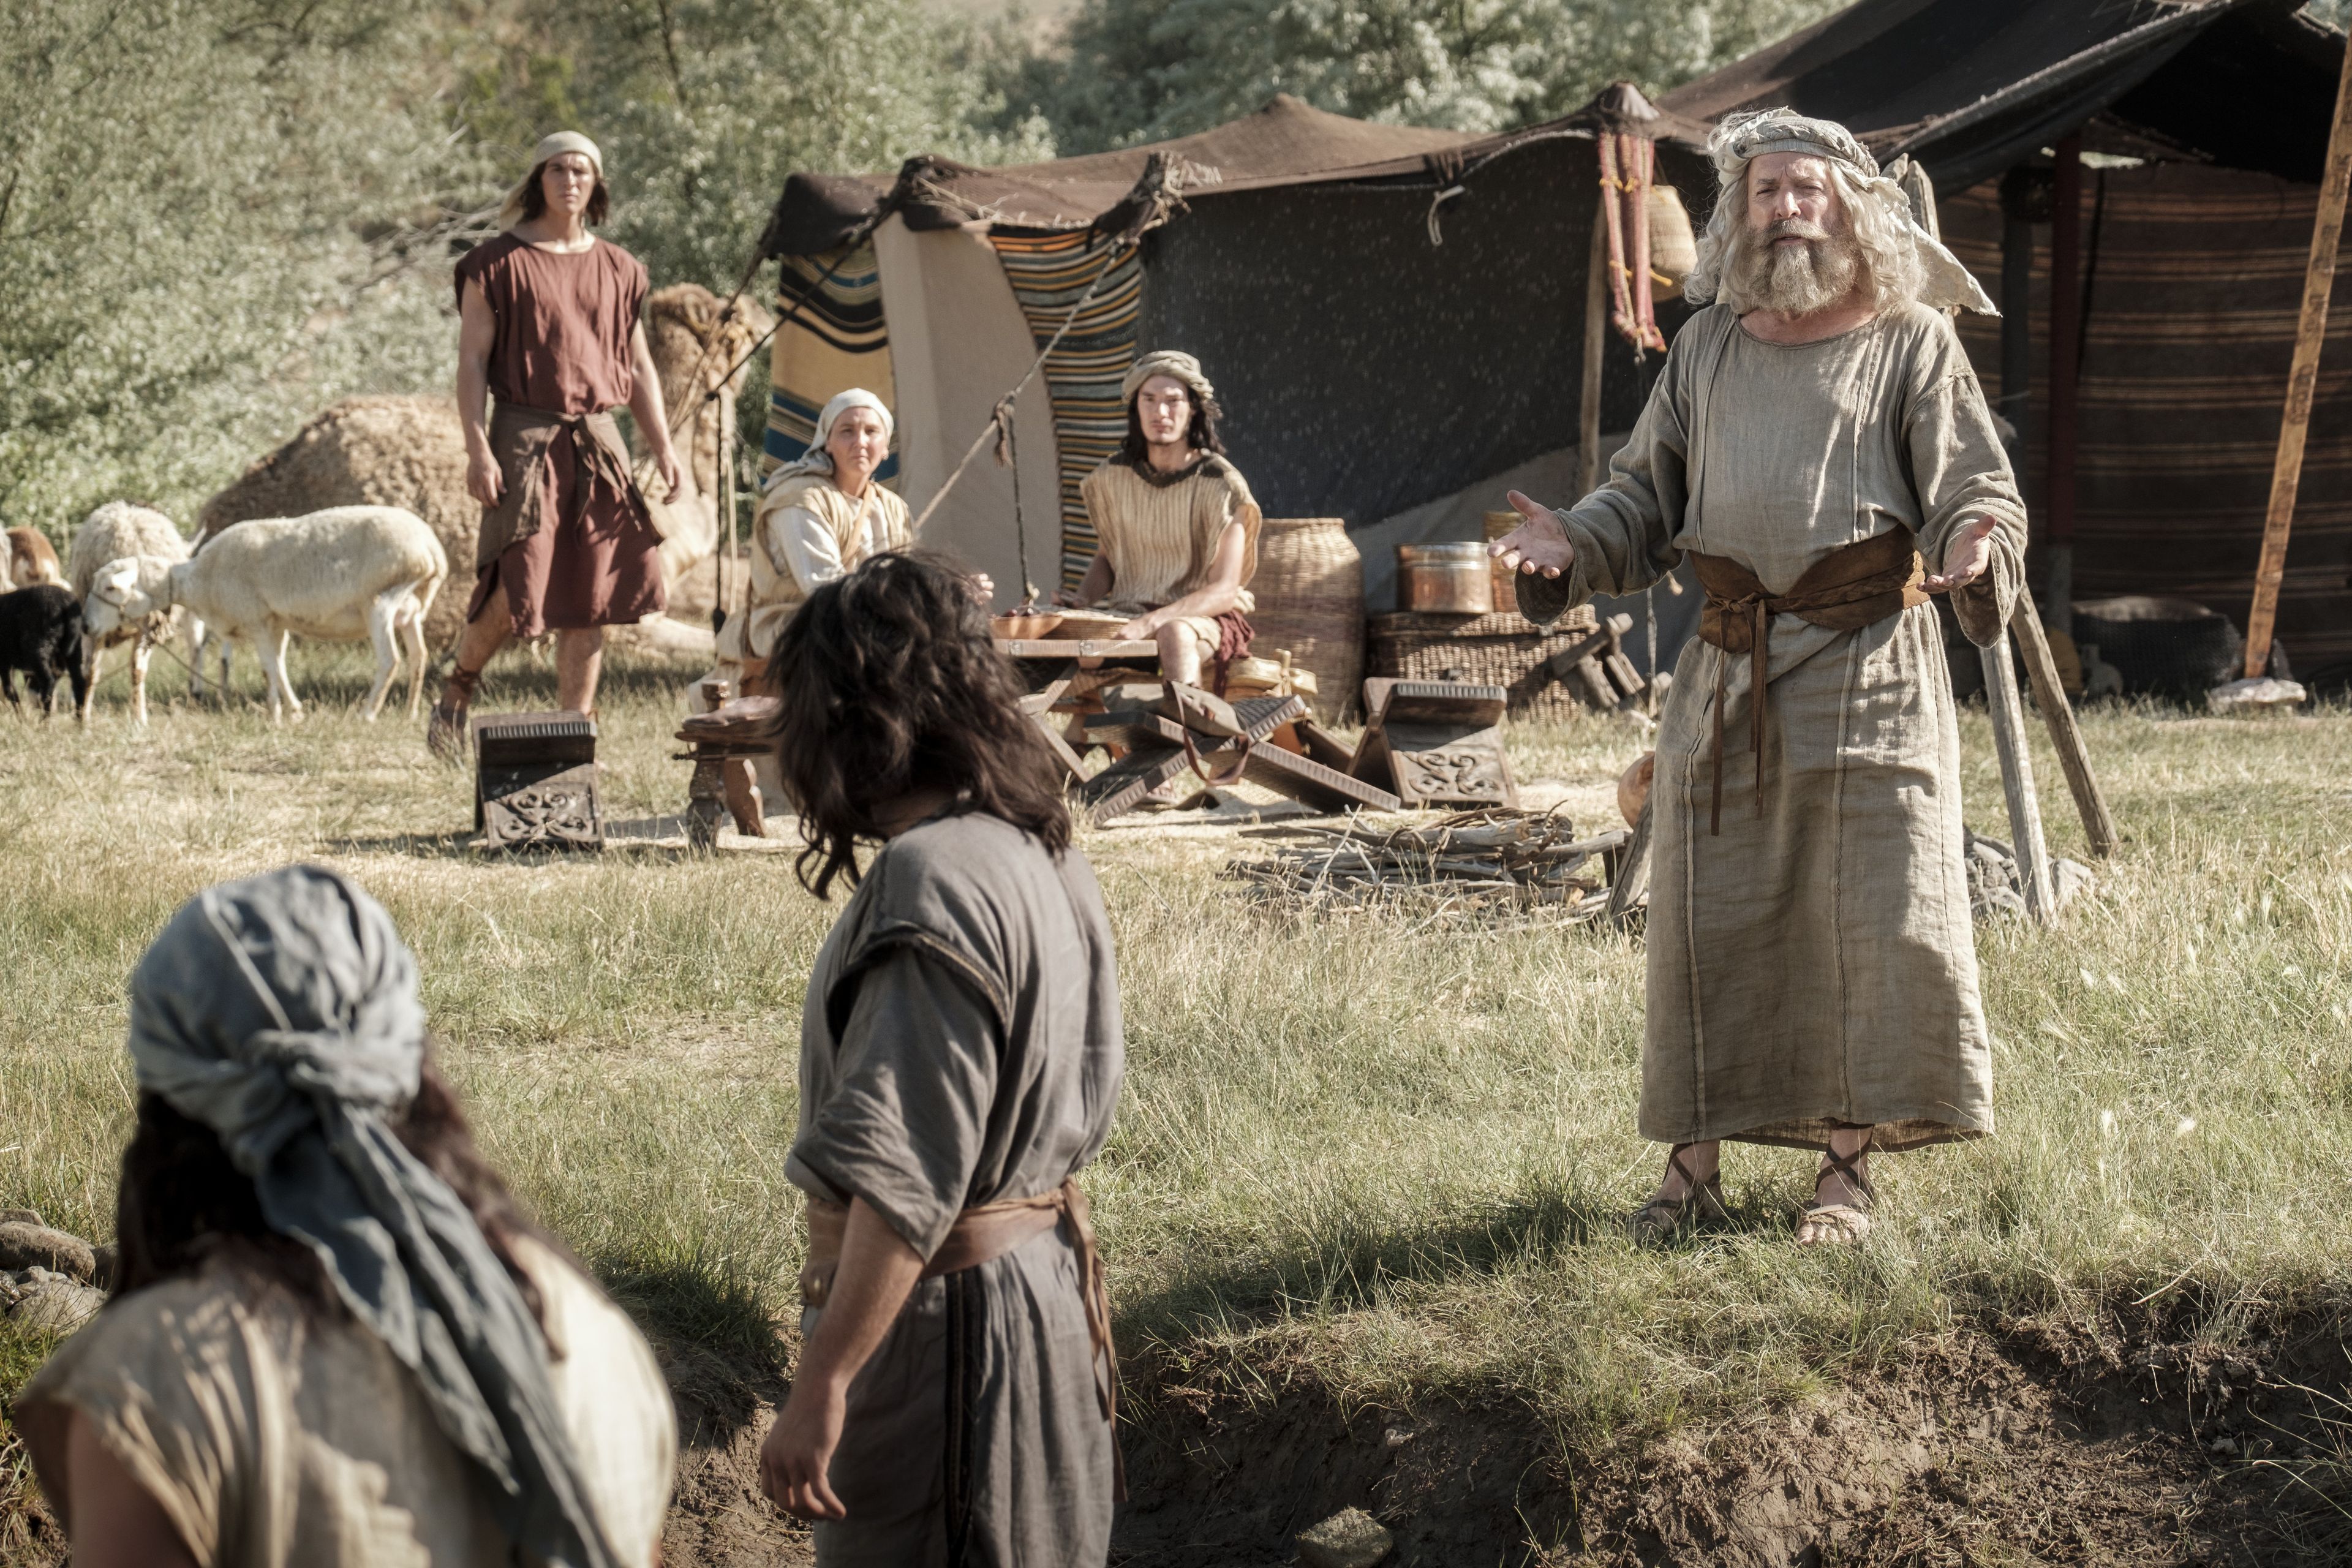 Lehi preaches to his family in their camp in the wilderness.